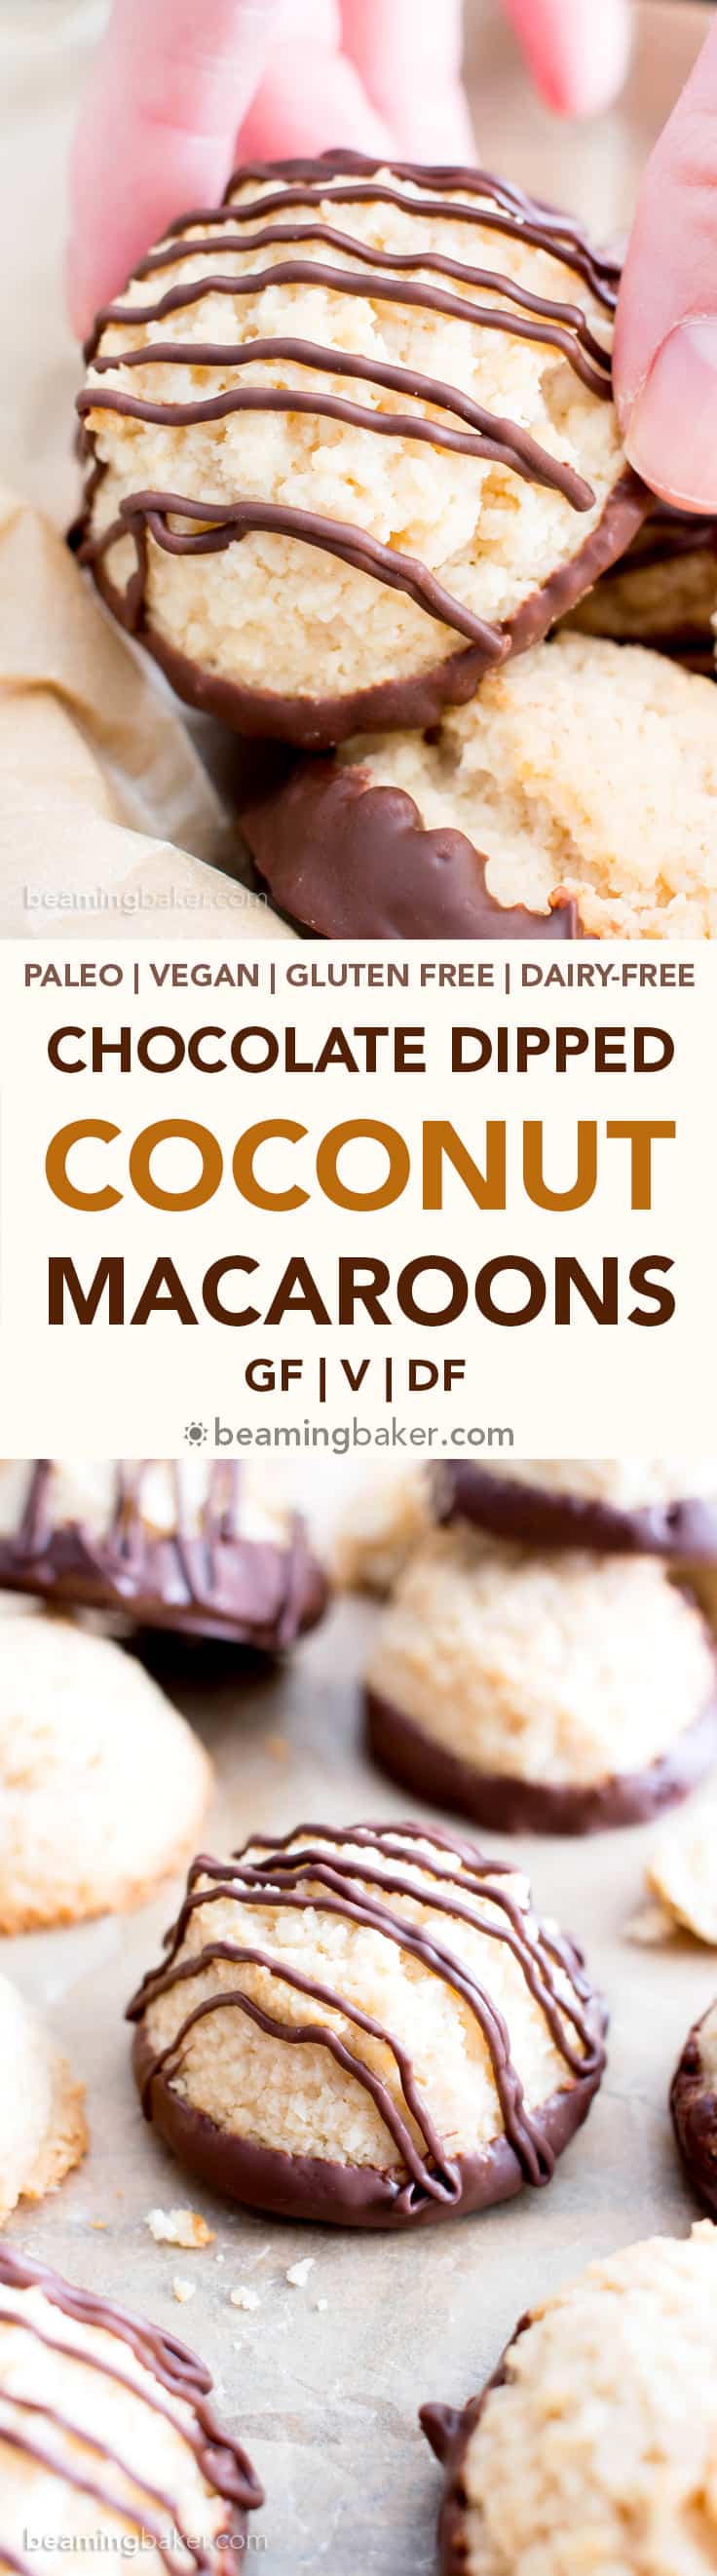 Chocolate Dipped Vegan Coconut Macaroons Recipe (V, GF): an easy recipe for chewy and satisfying chocolate-dipped coconut macaroons made with whole ingredients! #Vegan #Paleo #GlutenFree #DairyFree #Cookies #Coconut #Macaroons #Dessert | Recipe on BeamingBaker.com